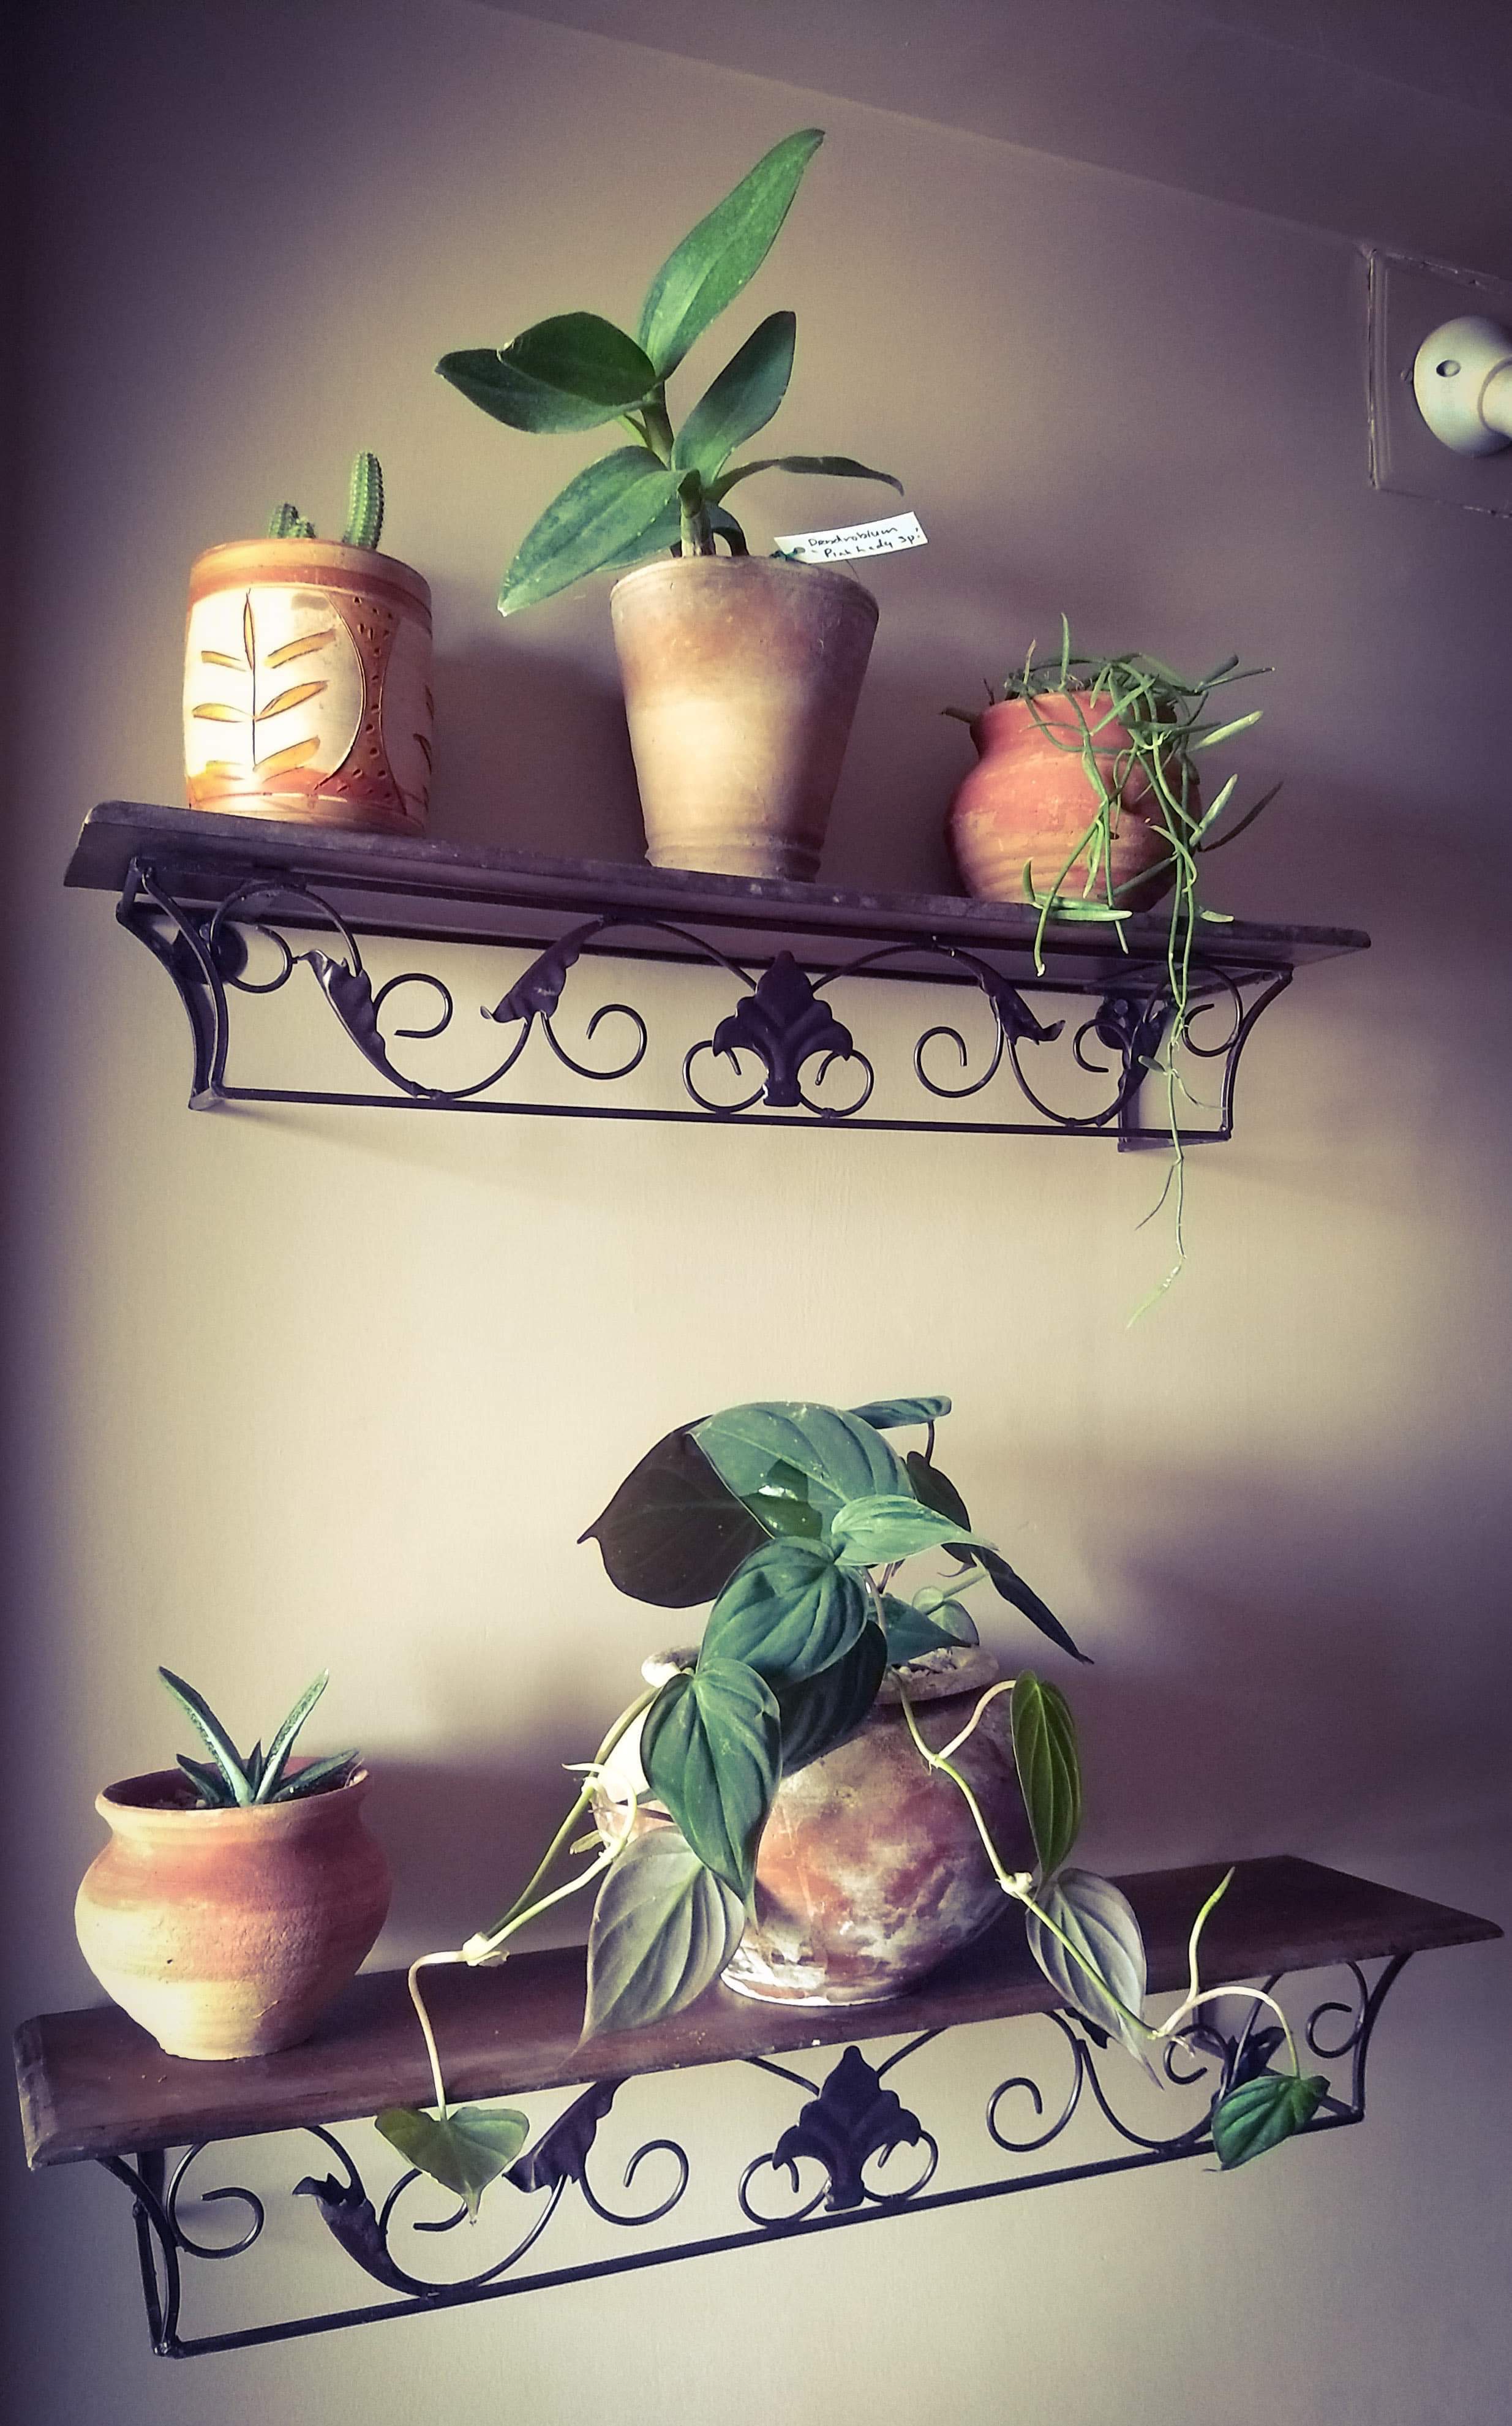 Shelves on the wall that hold potted plants - plants are Ajita’s passion.